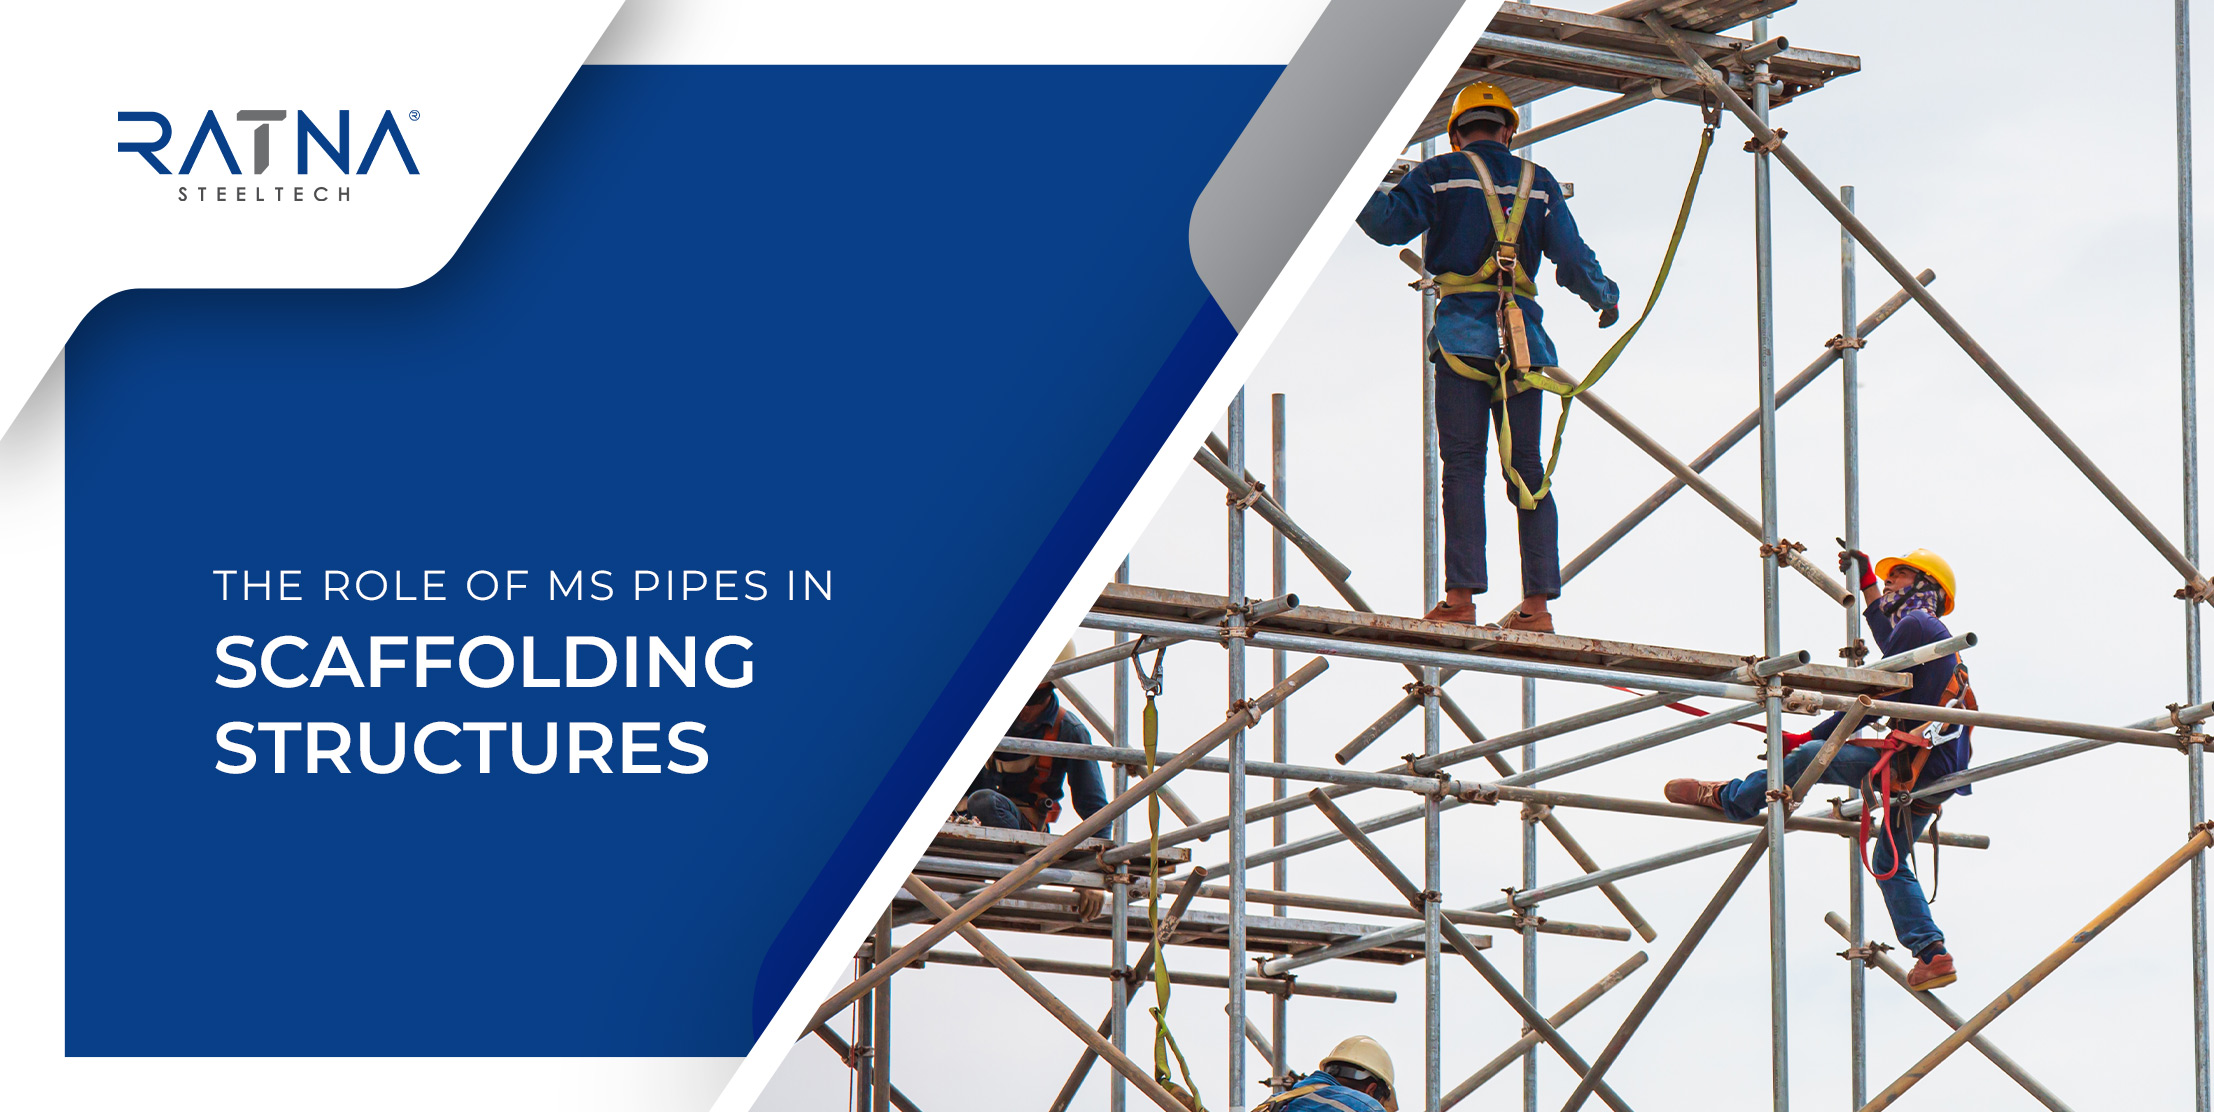 The Role of MS Pipes in Scaffolding Structures